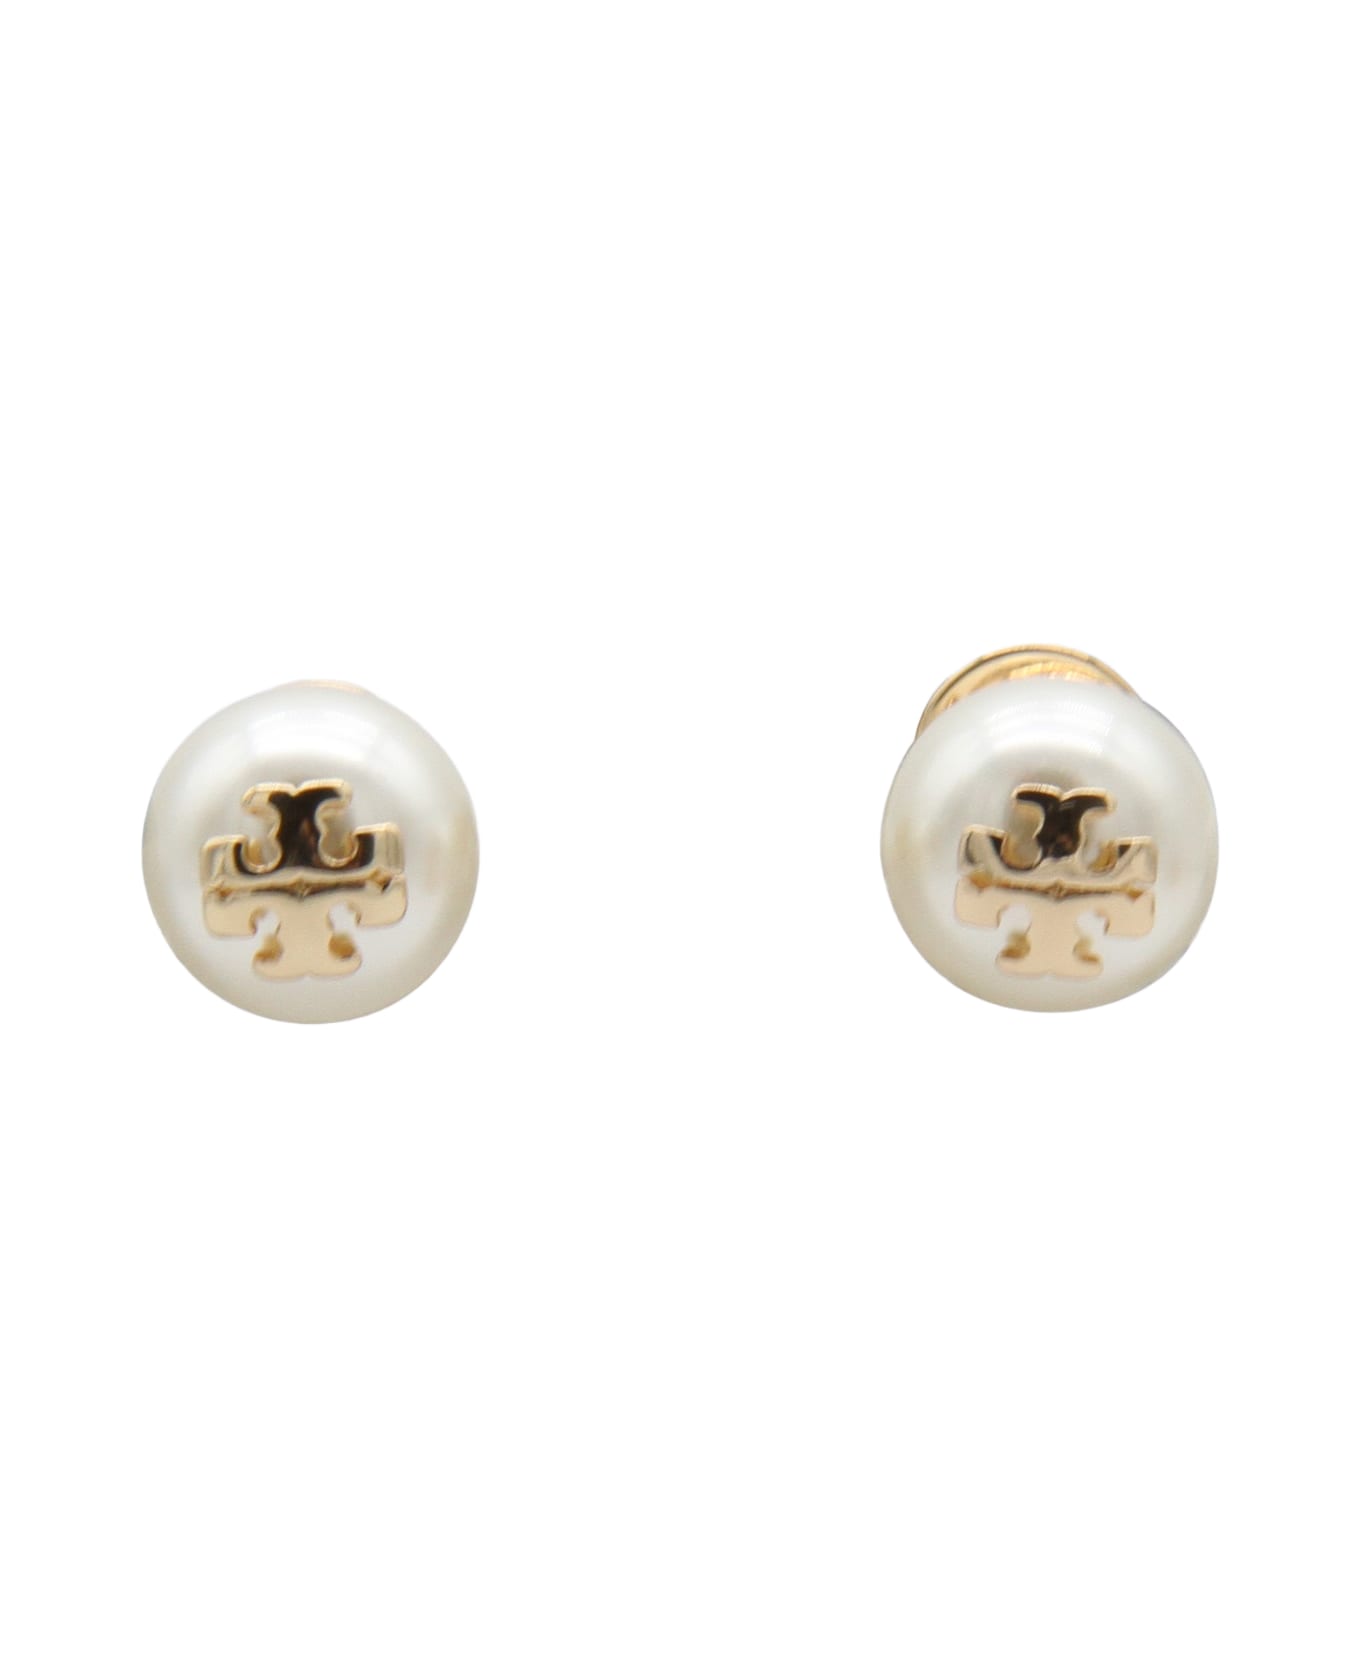 Tory Burch Gold Brass Earrings - Ivory/ToryGold イヤリング